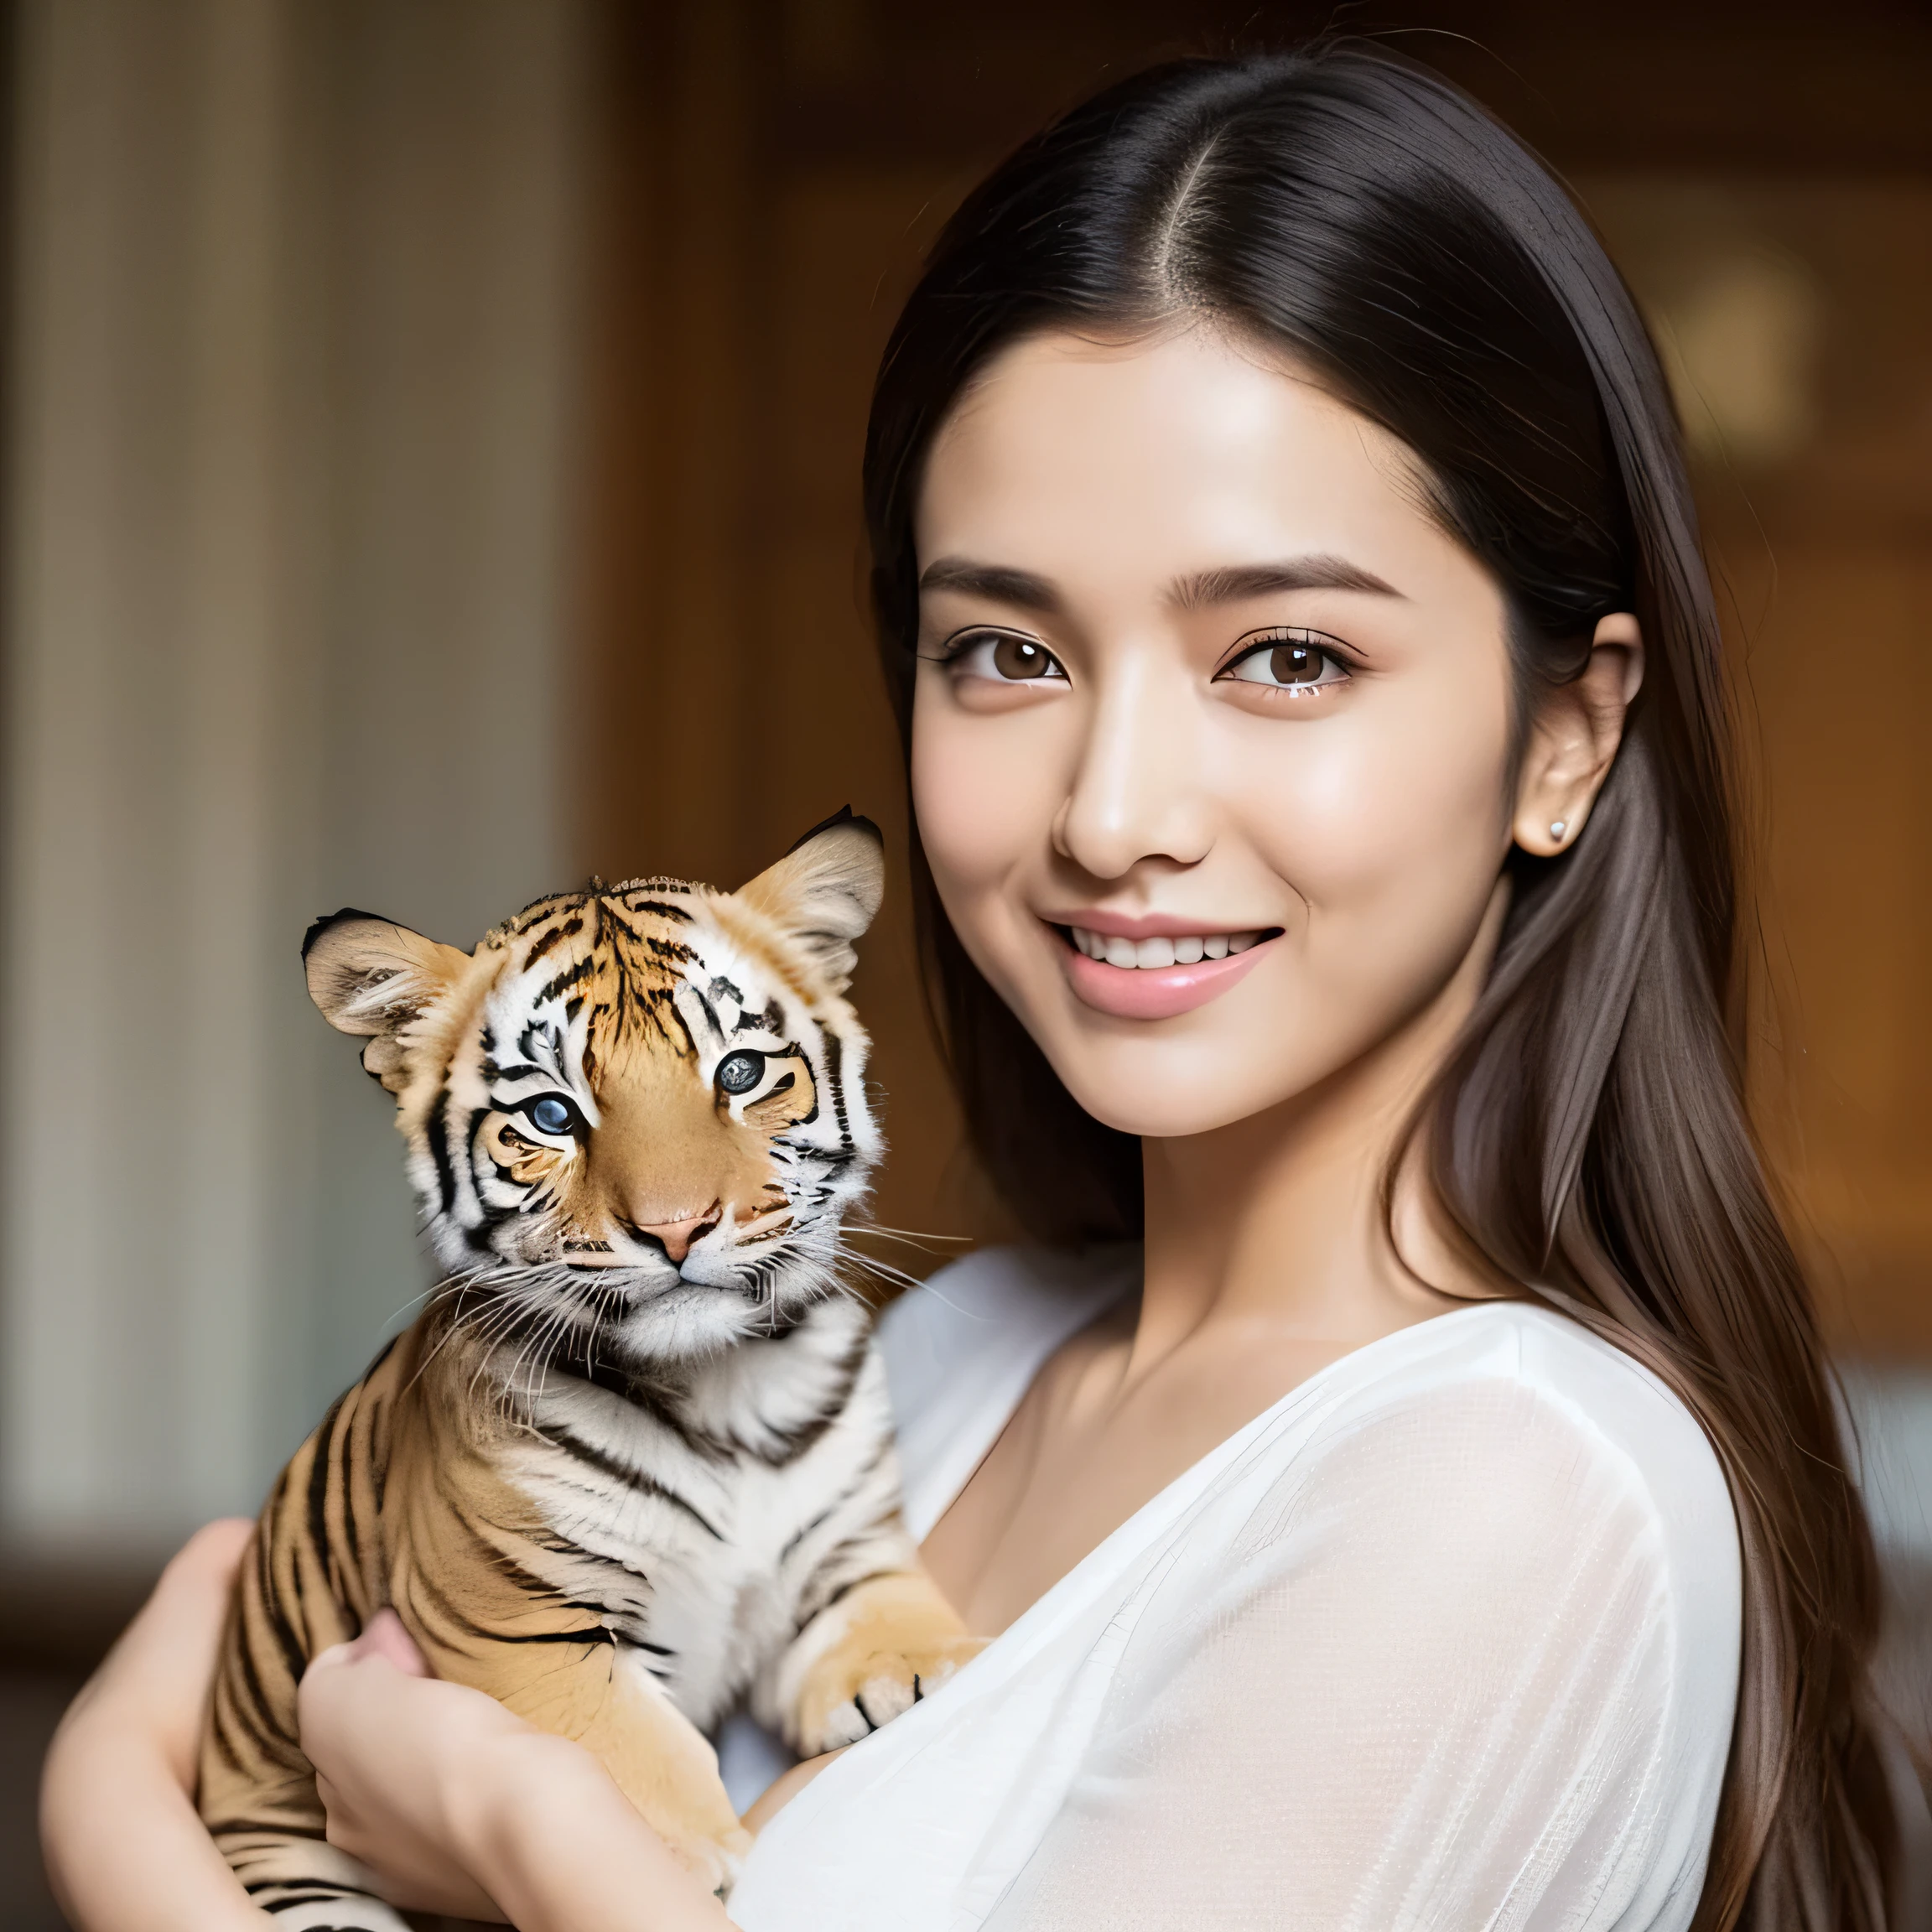 (best quality,realistic),portrait, one indian gorgeous 23 years old woman, smile, beautiful, clear facial features, ultra-realistic photographs, Smile, New Indian girl with tiger baby in hand